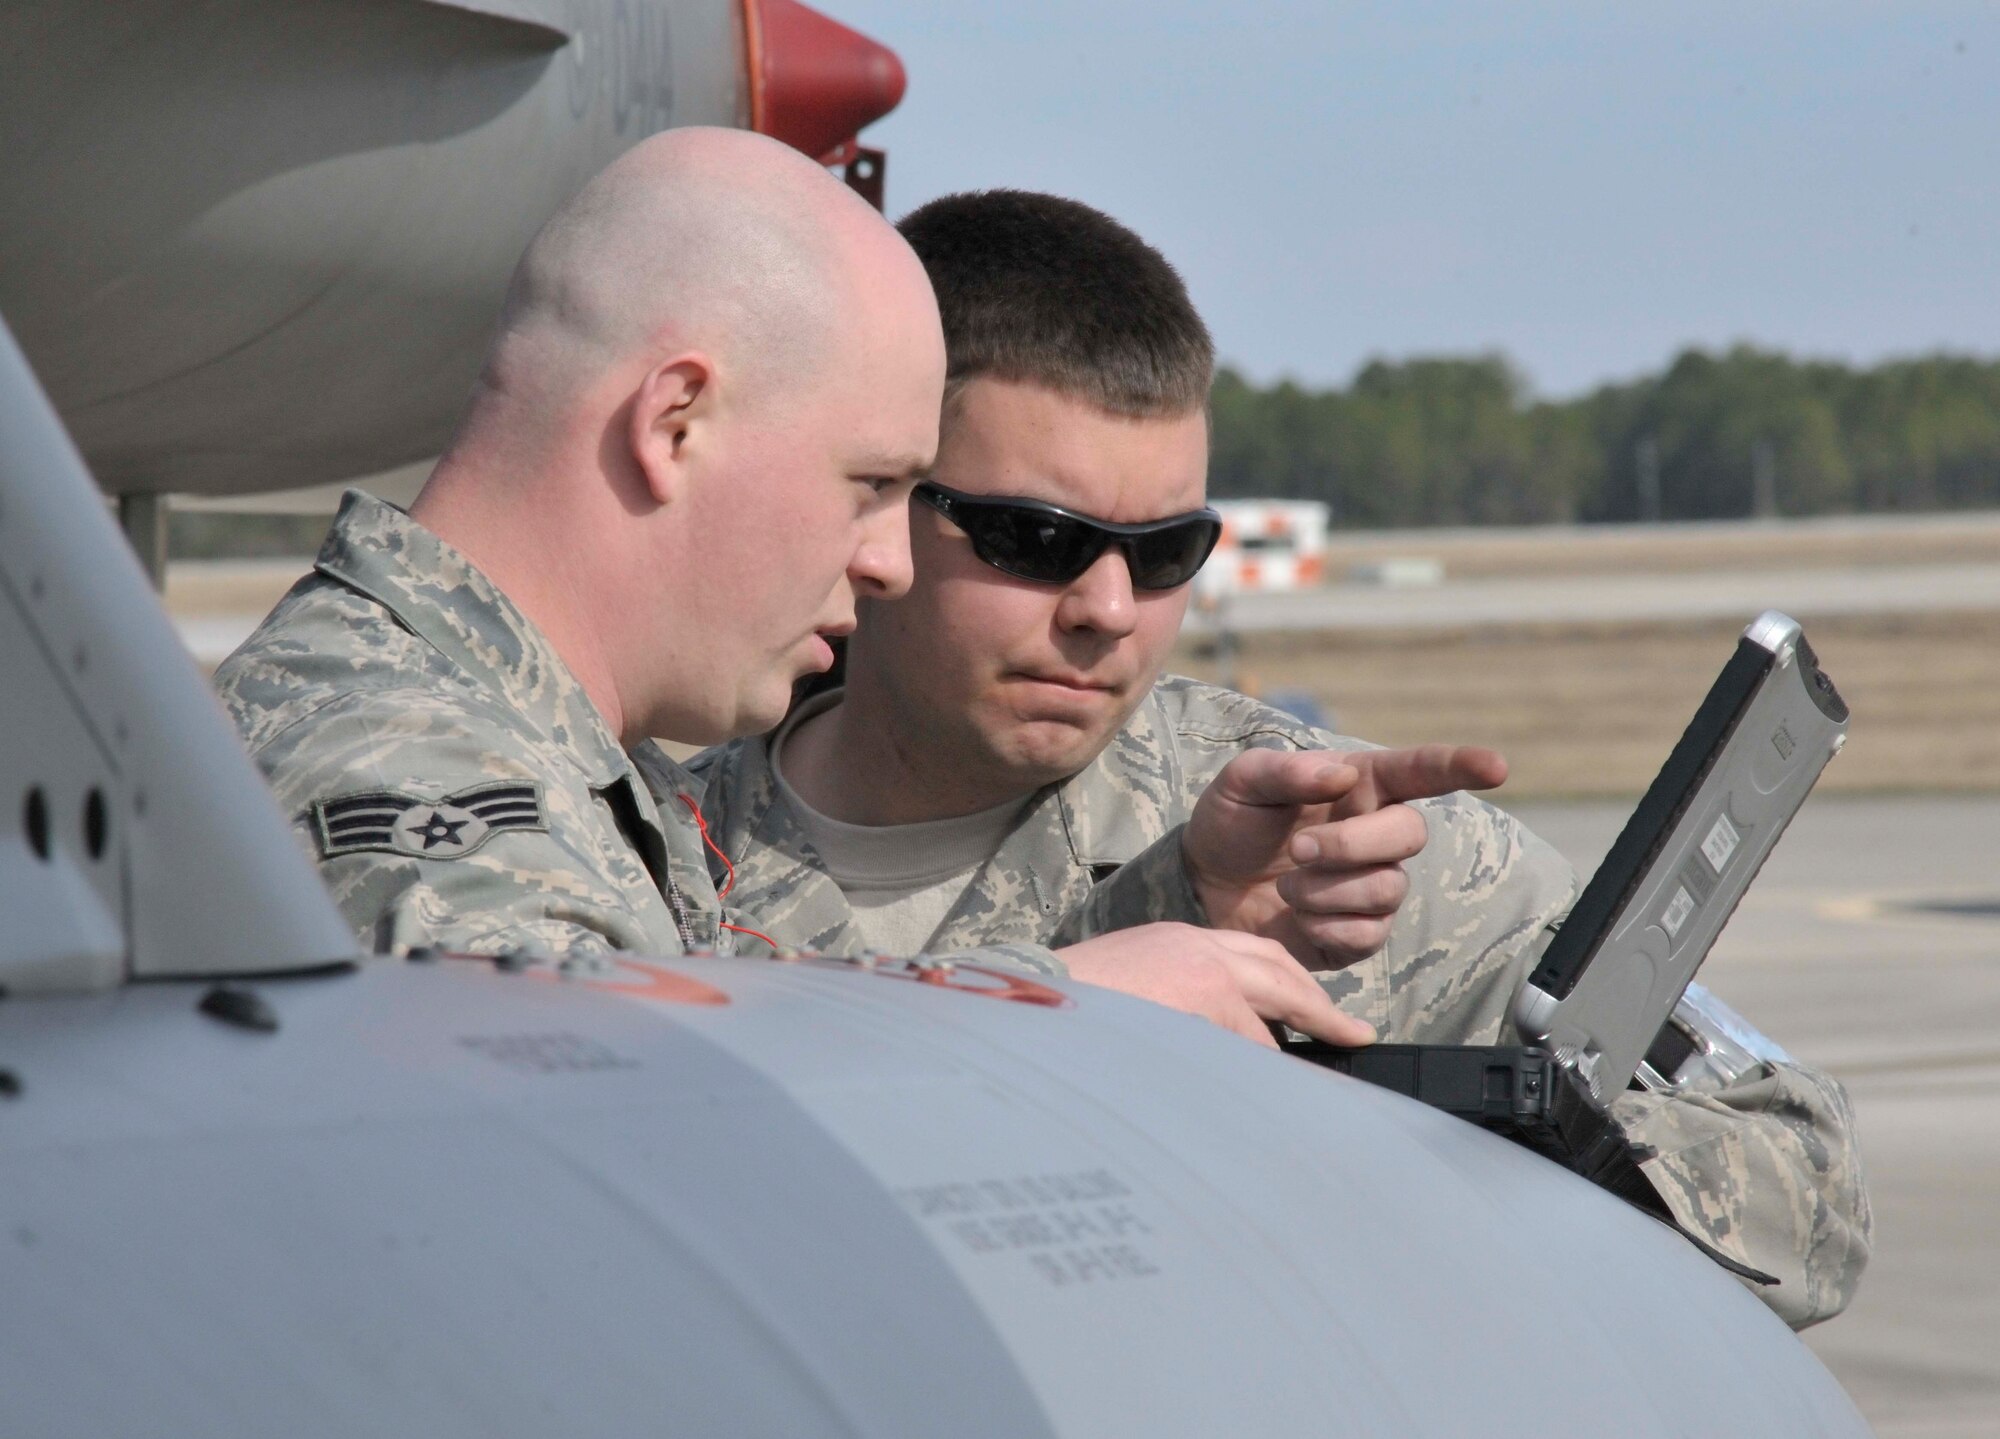 Maintainers from the 179th Fighter Squadron, a subordinate unit of the 148th Fighter Wing out of Duluth, Minn., review technical data prior to preparing an aircrew for a mission at Tyndall Air Force Base, Fla., Jan. 27. The 148th FW is working with the 53rd Weapons Evaluation Group at Tyndall AFB for two weeks to train for their Air Sovereignty Alert missions and to validate their new Block 50 F-16s. (U.S. Air Force photo by Tech. Sgt. John Hoffmann)